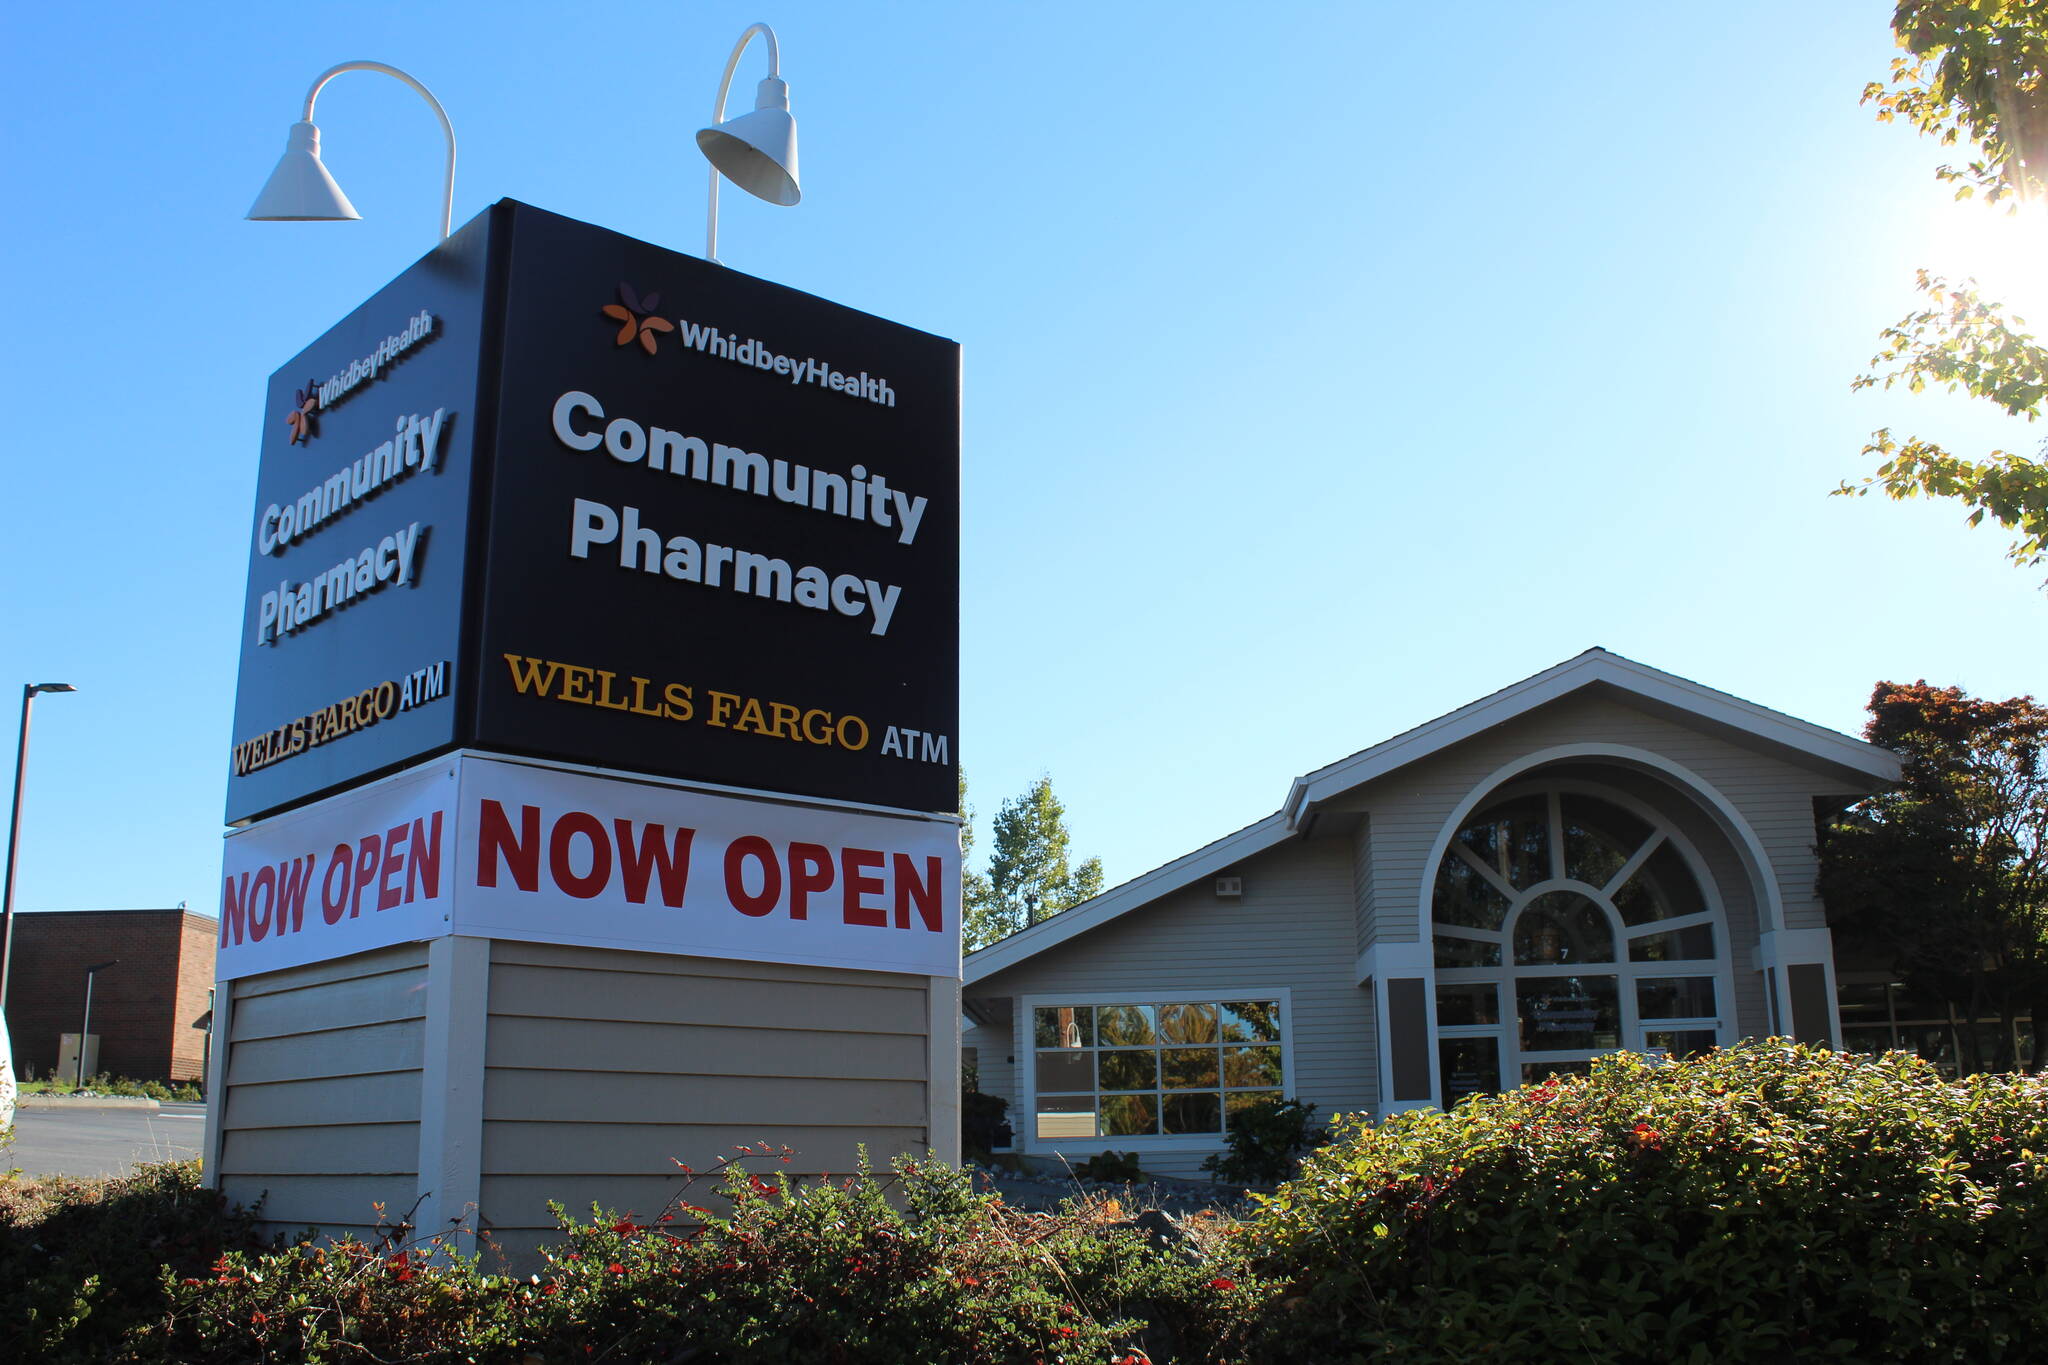 WhidbeyHealth Community Pharmacy opened in Coupeville on Sept. 21. (Photo by Karina Andrew/Whidbey News-Times)